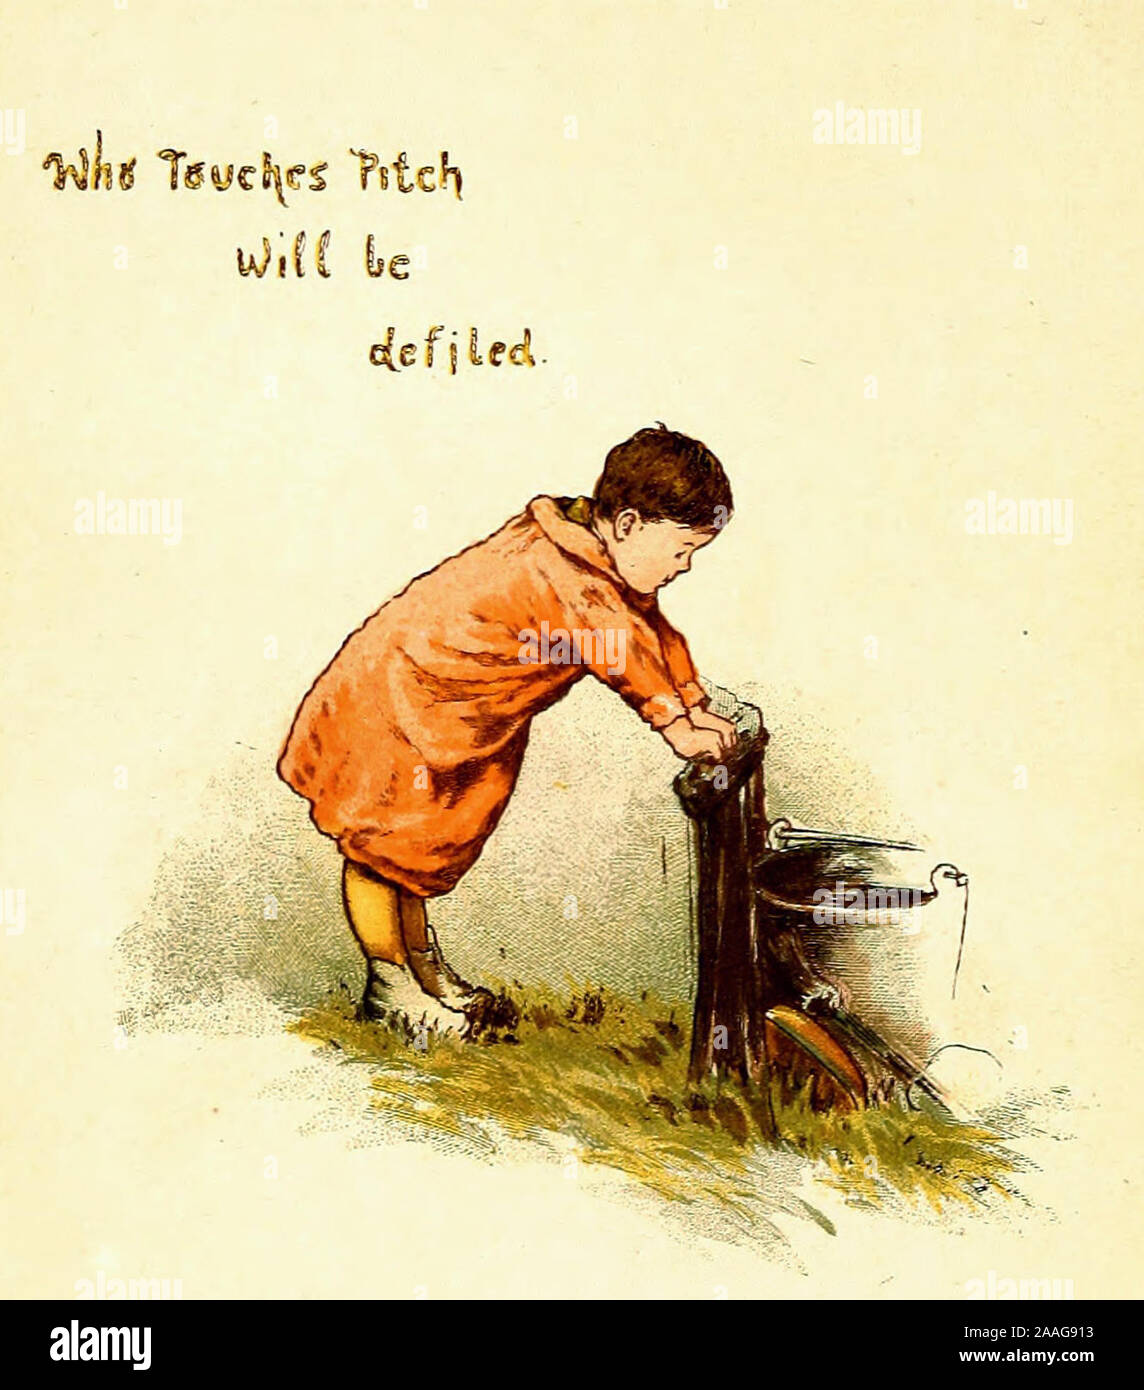 Who touches pitch will be defiled - Vintage Illustration of an Old Proverb Stock Photo